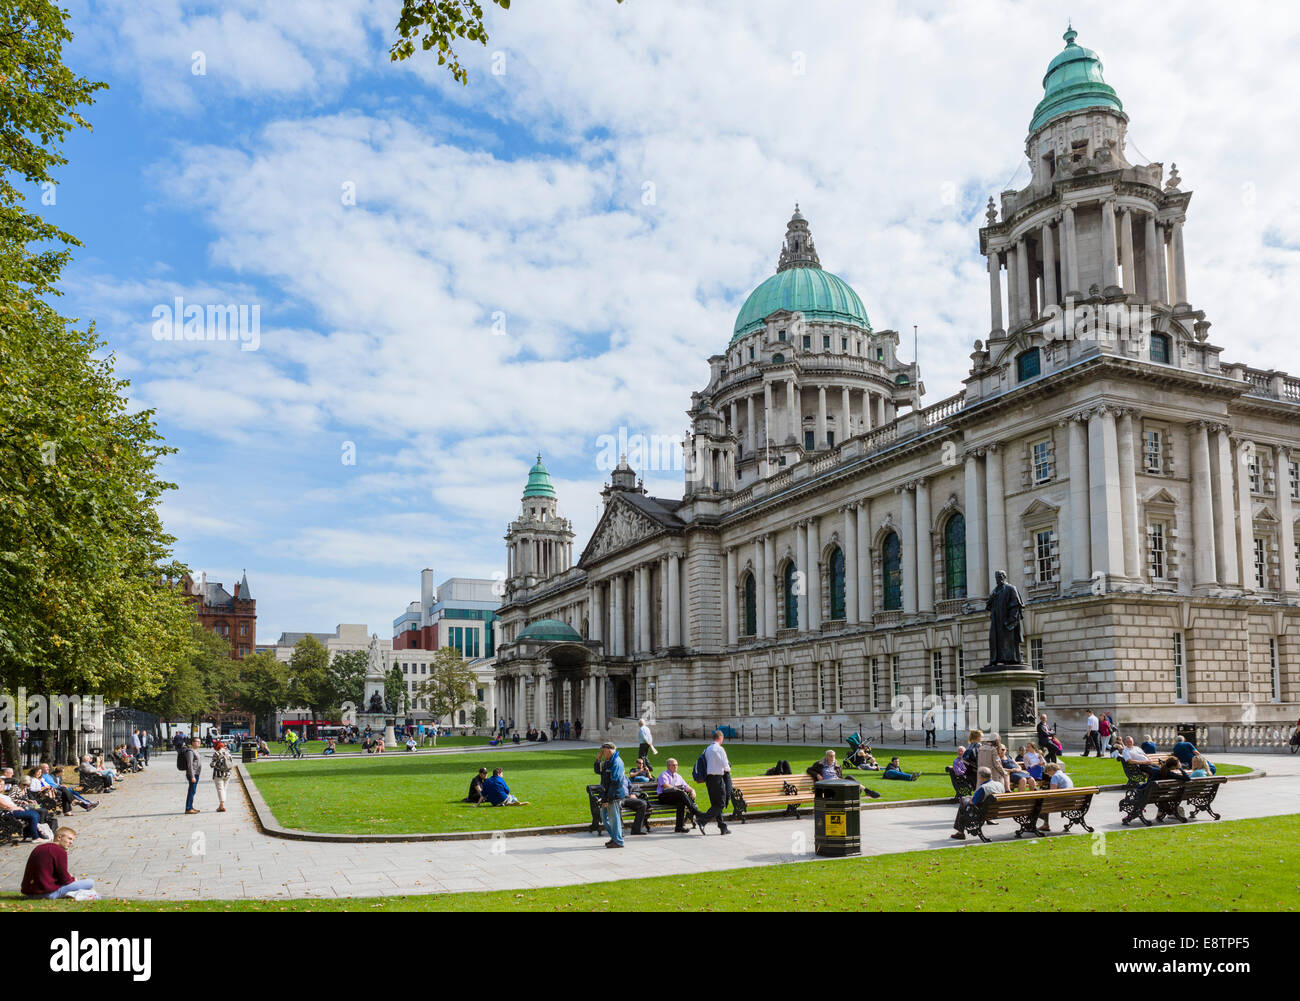 Belfast City Hall, Donegall Square, Belfast, Irlande du Nord, Royaume-Uni Banque D'Images